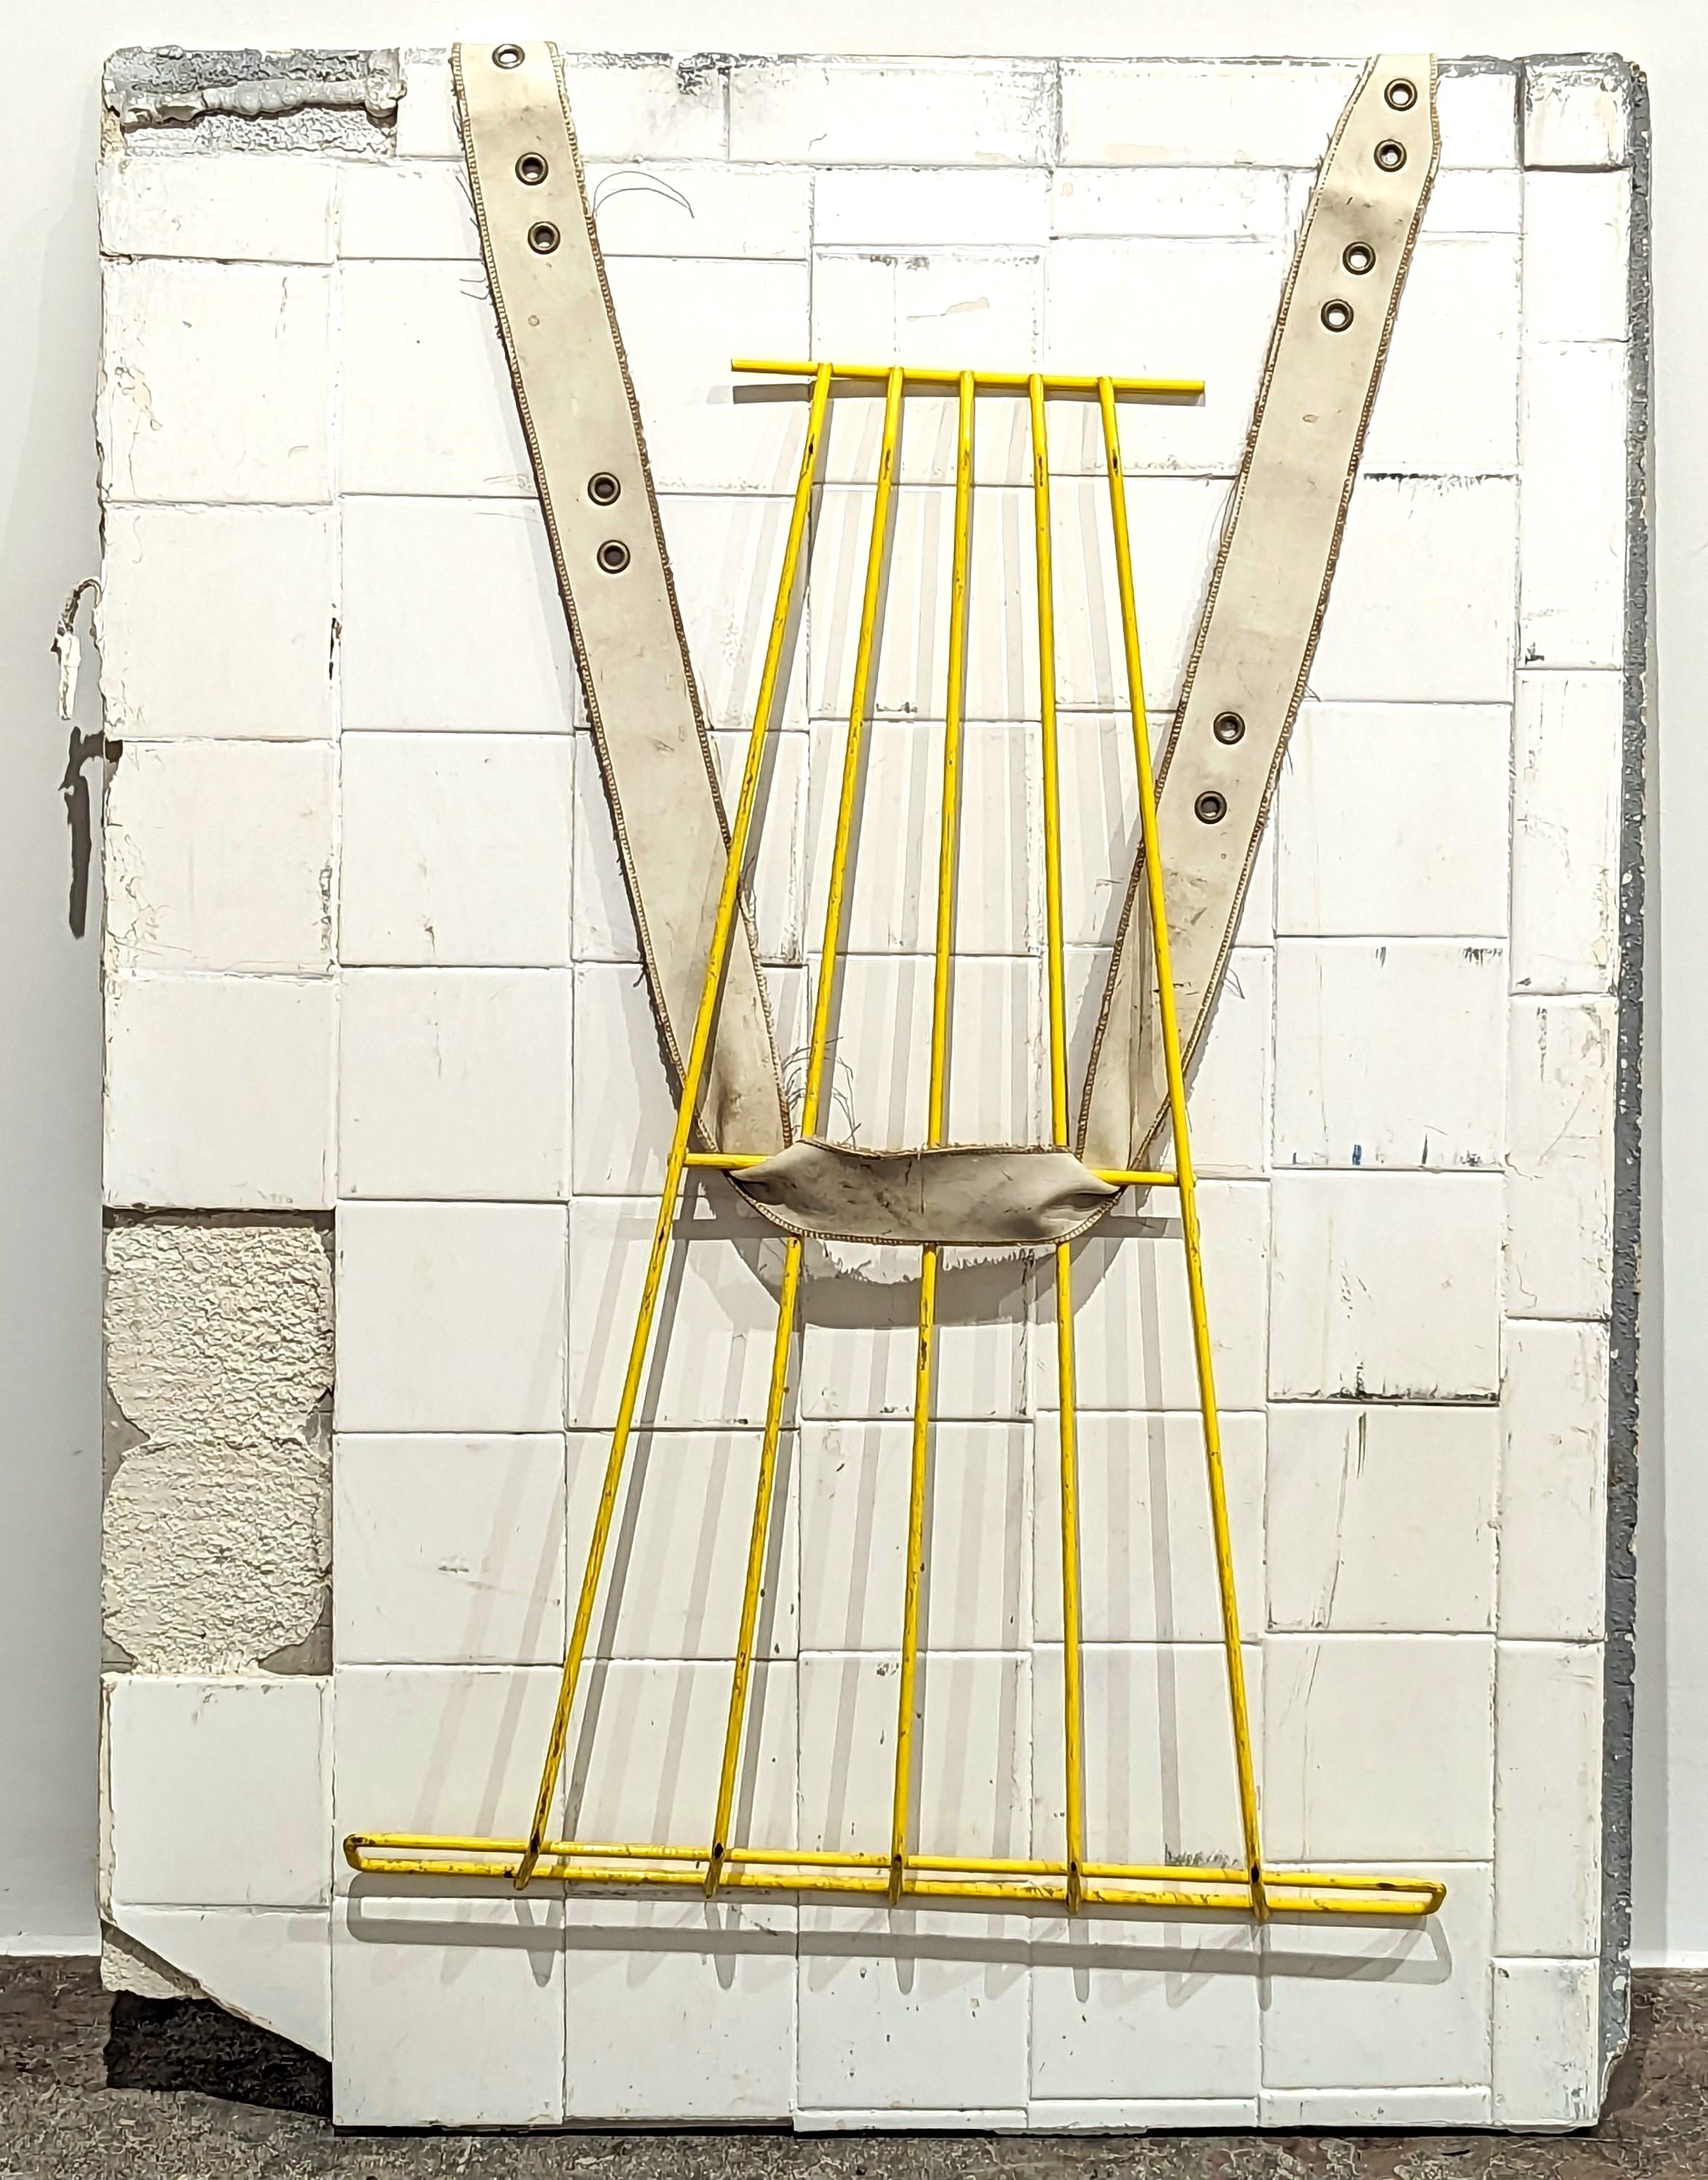 Benji Stiles Abstract Sculpture - "Carry the Weight" Contemporary Abstract Mixed Media Found Object Wall Sculpture